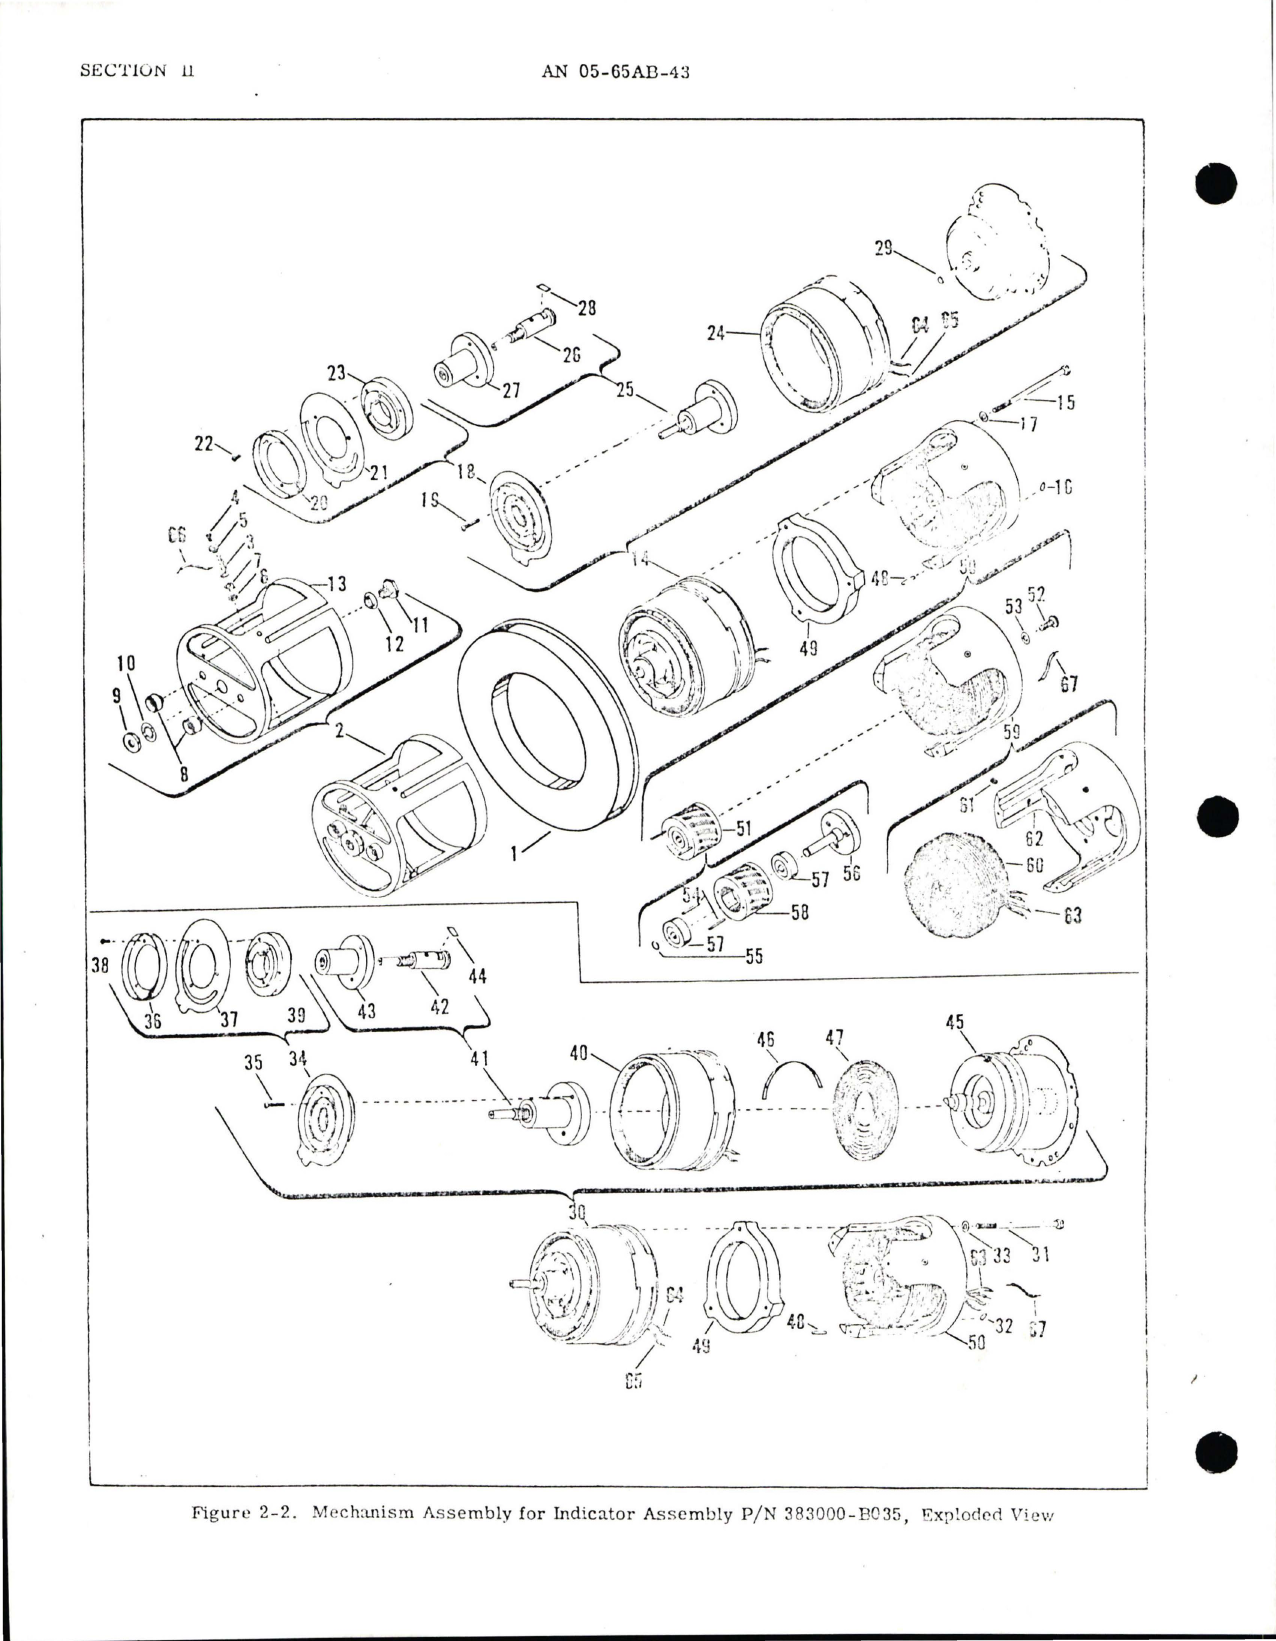 Sample page 8 from AirCorps Library document: Capacitor Fuel Gage System Indicators